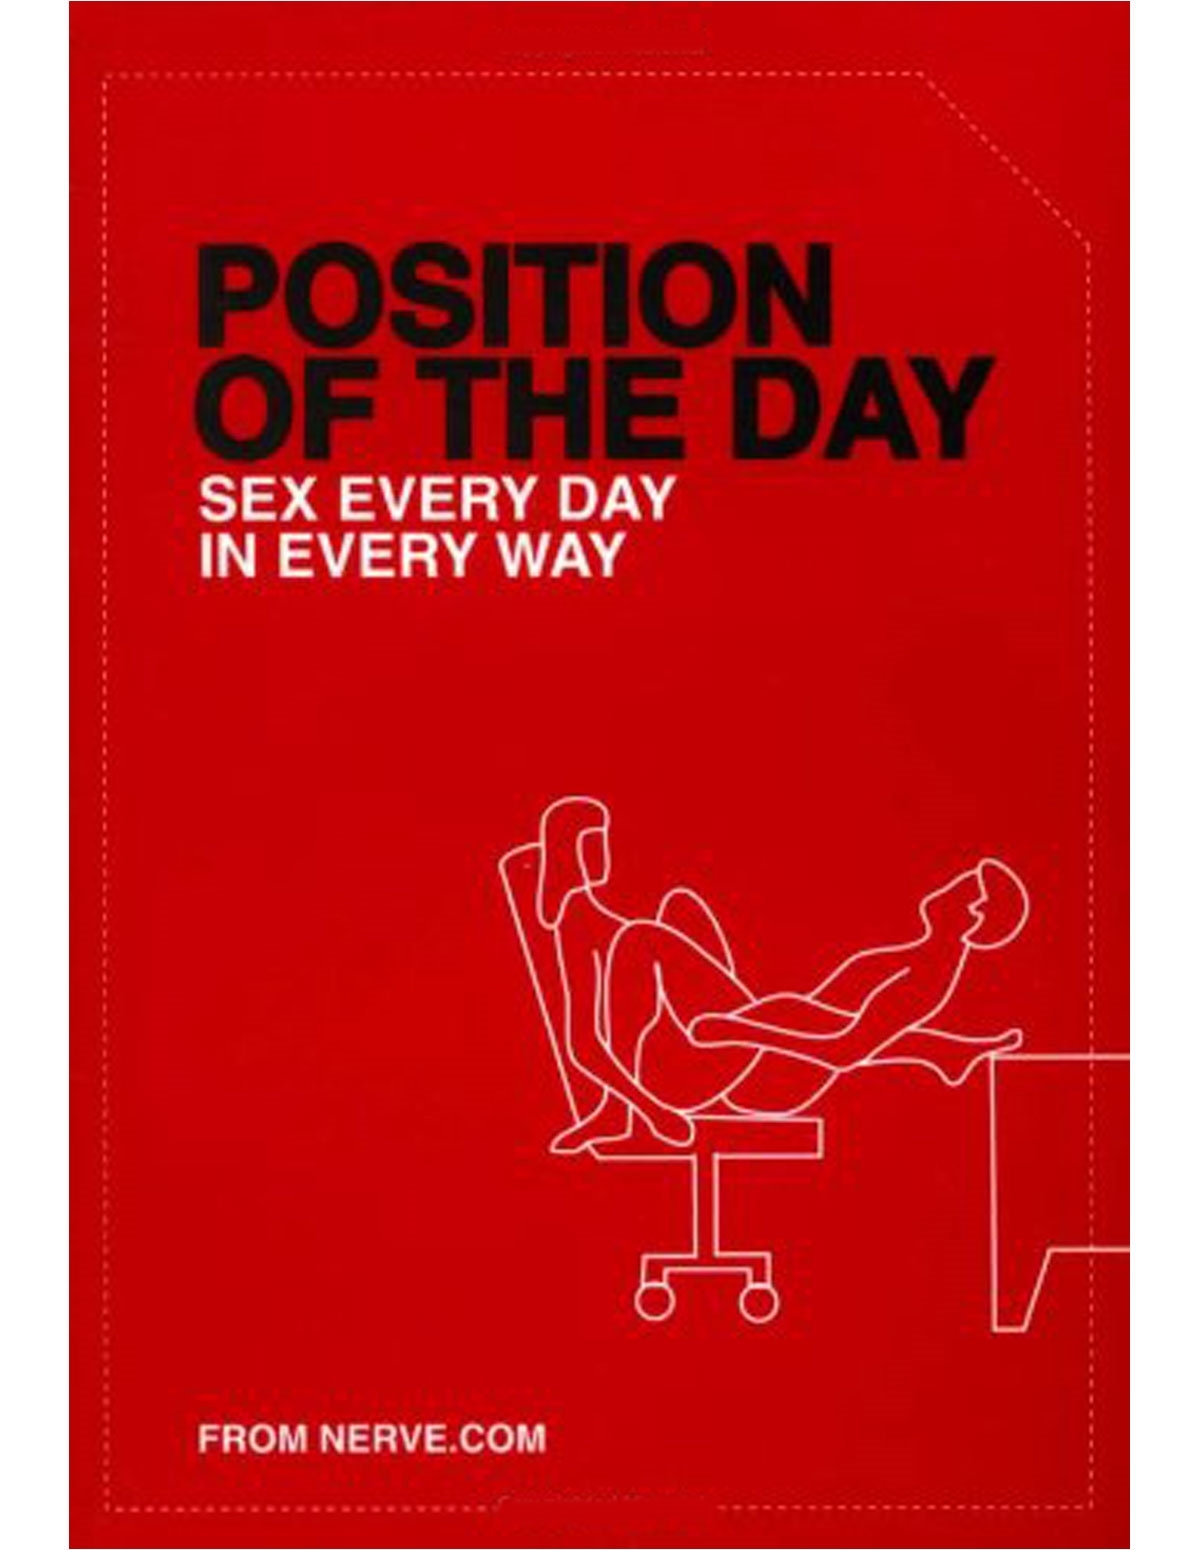 Position Of The Day Book image pic